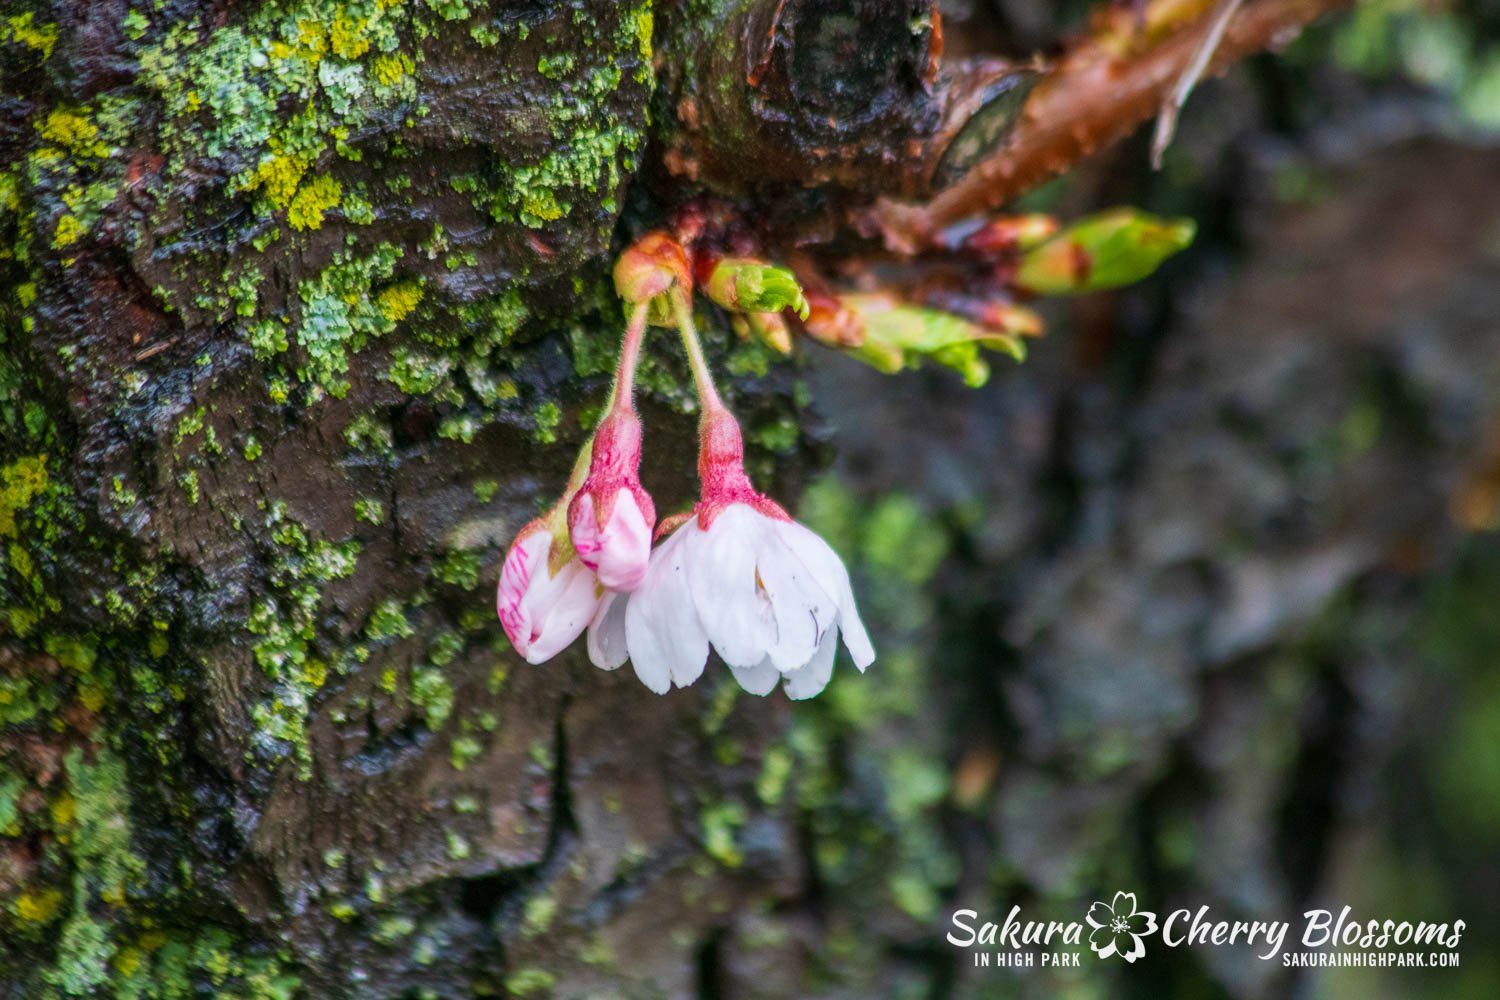 Sakura Watch April 12, 2024 - Exciting new to share! I spotted the very first open blossoms in High Park today! They were lower on the trunk and base of one tree and they marked the official beginning of the full bloom next week! More details, video,